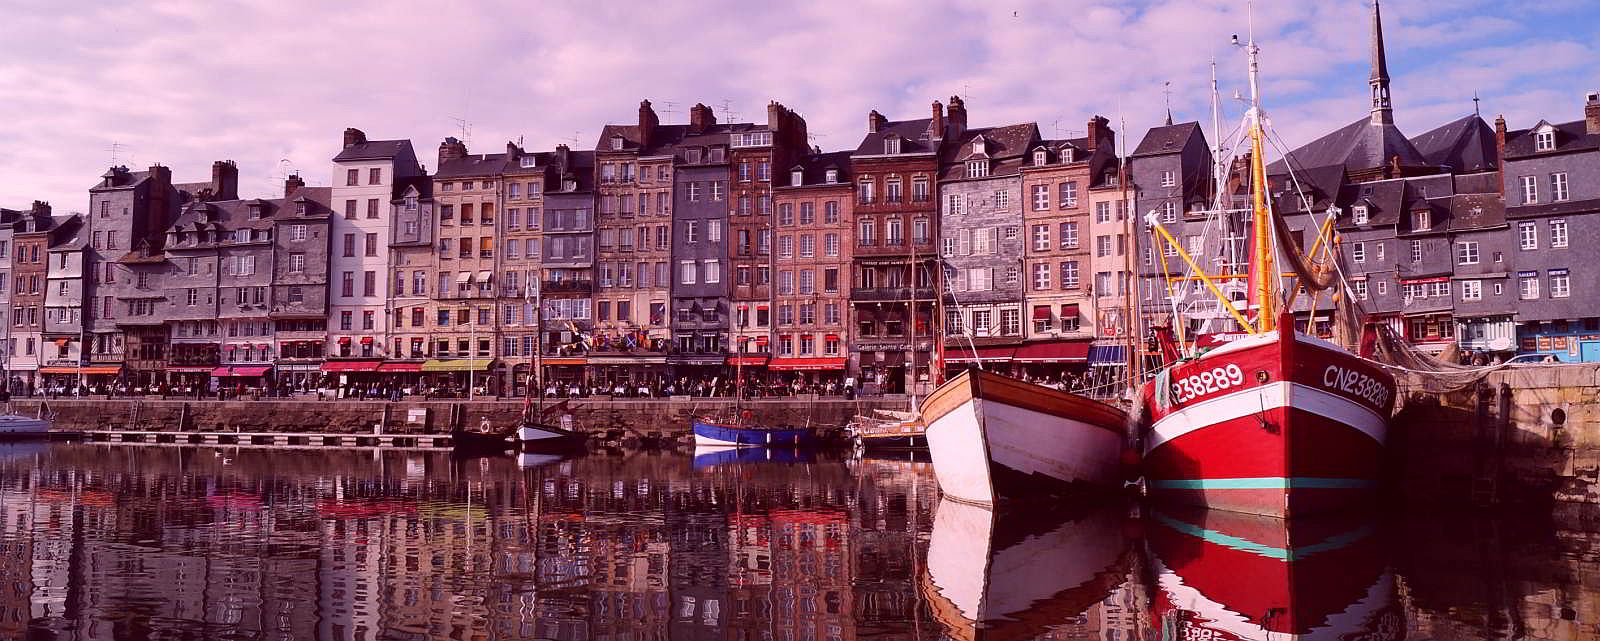 Normandy Honfleur Luxury Holidays with In-Luxe Travel France, The specialist of luxury bespoke holidays in France since 2007